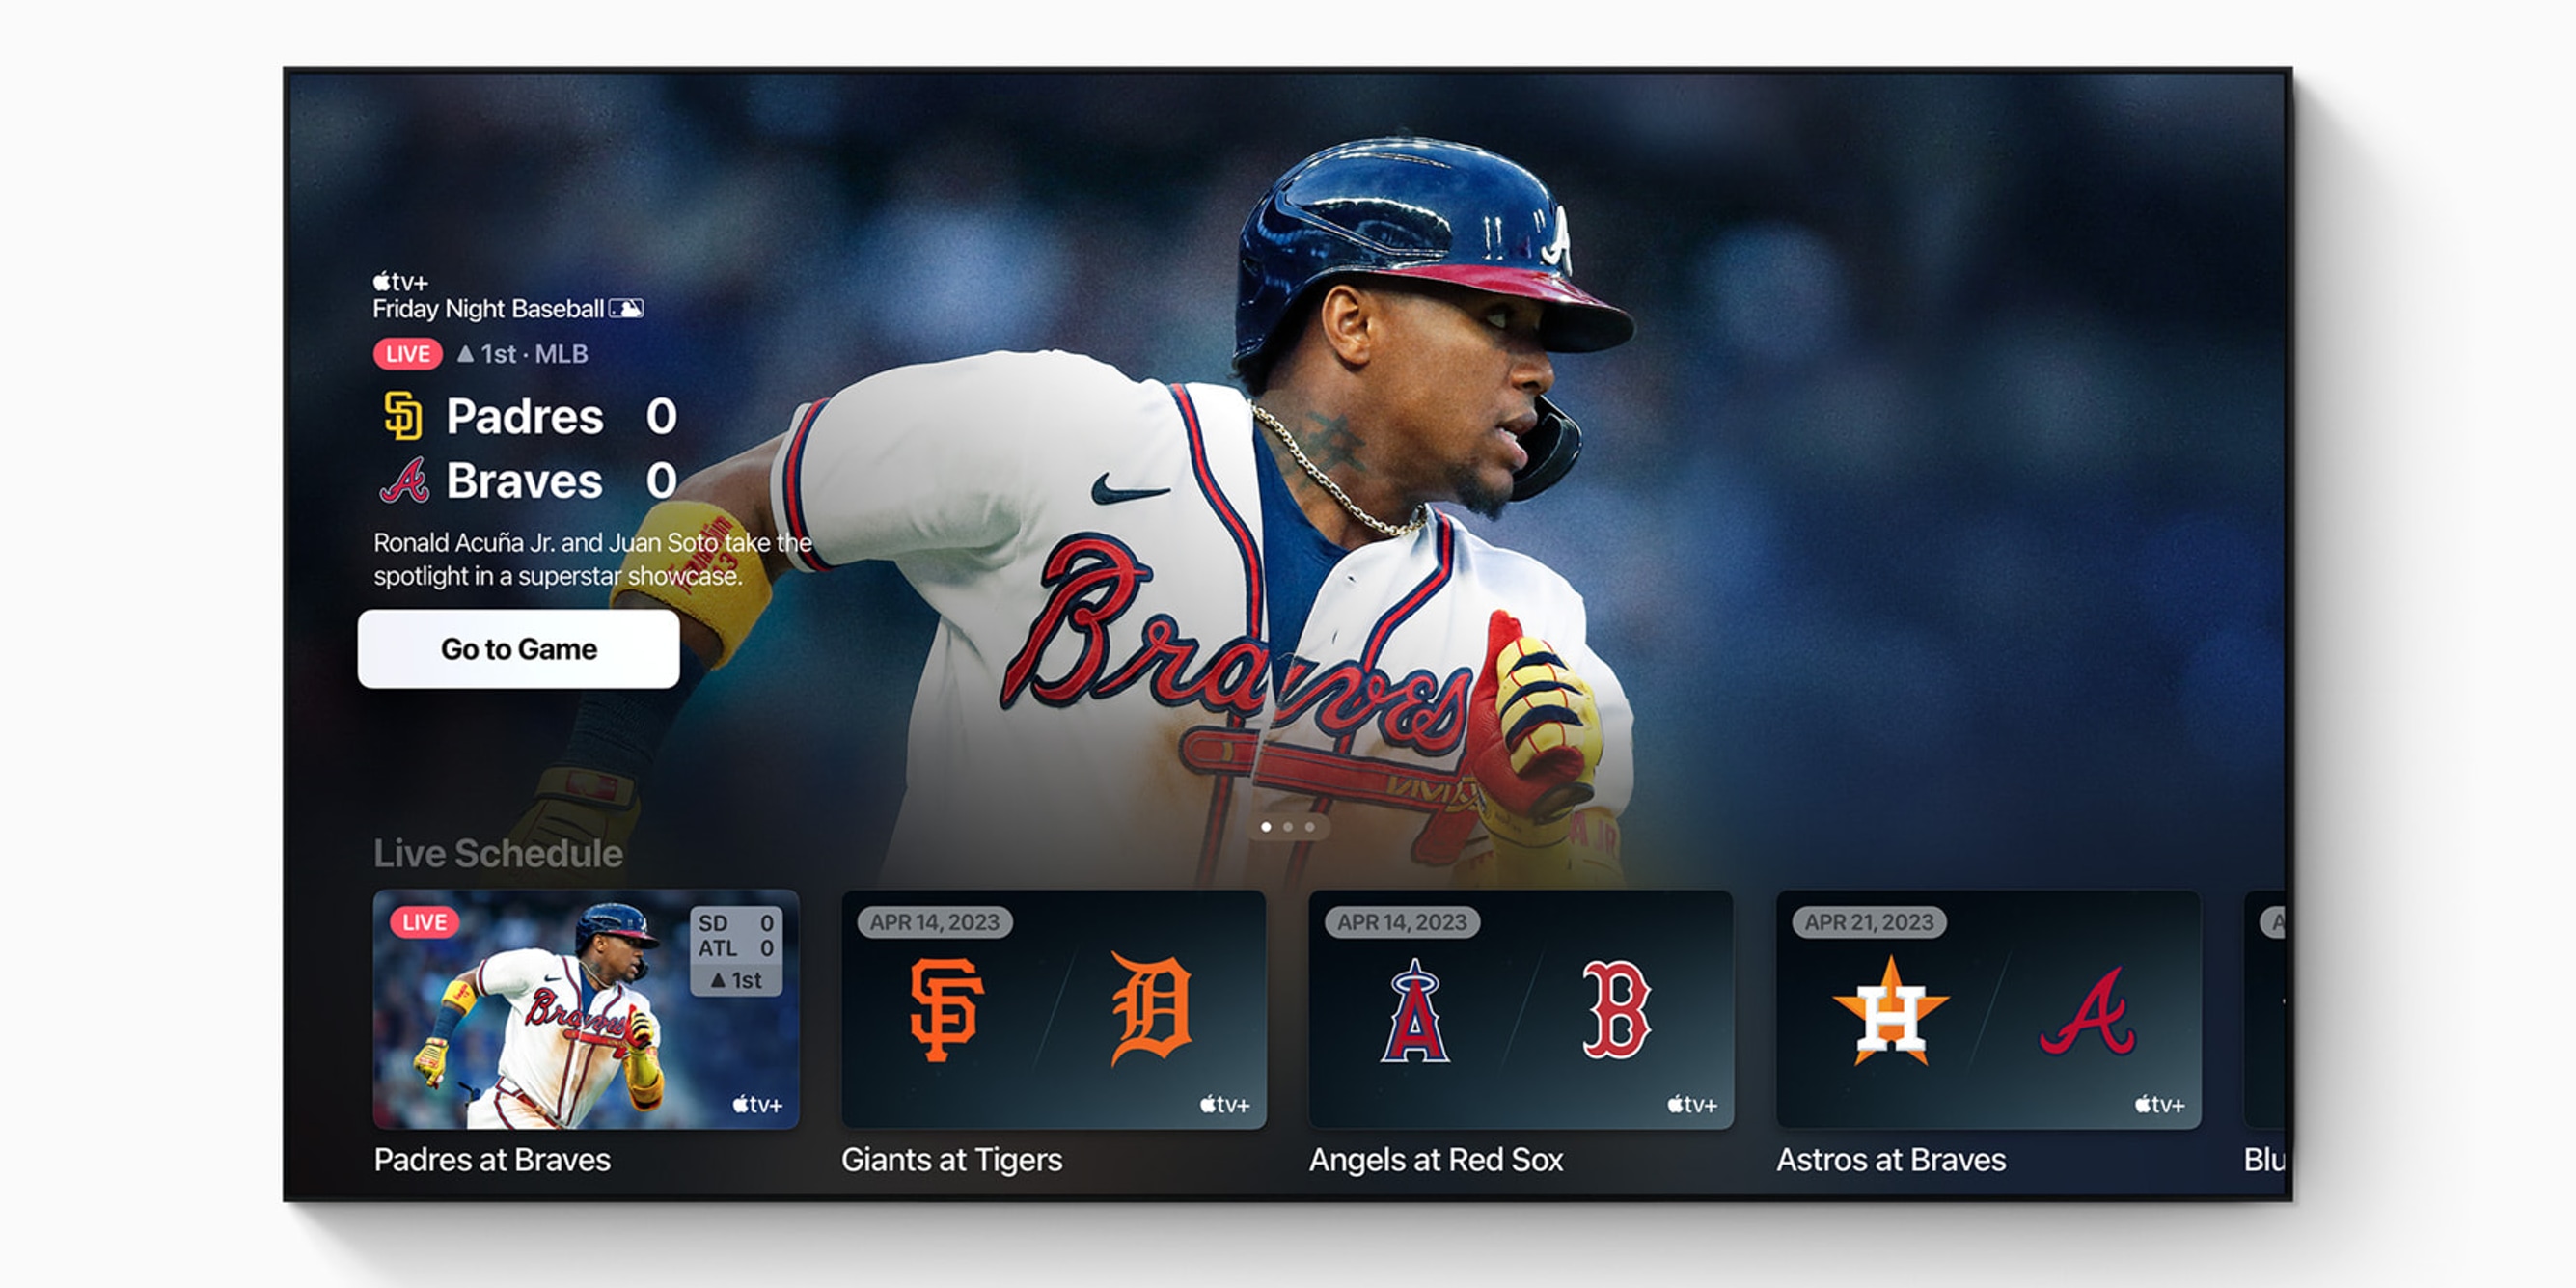 Heres the August schedule for Friday Night Baseball on Apple TV+